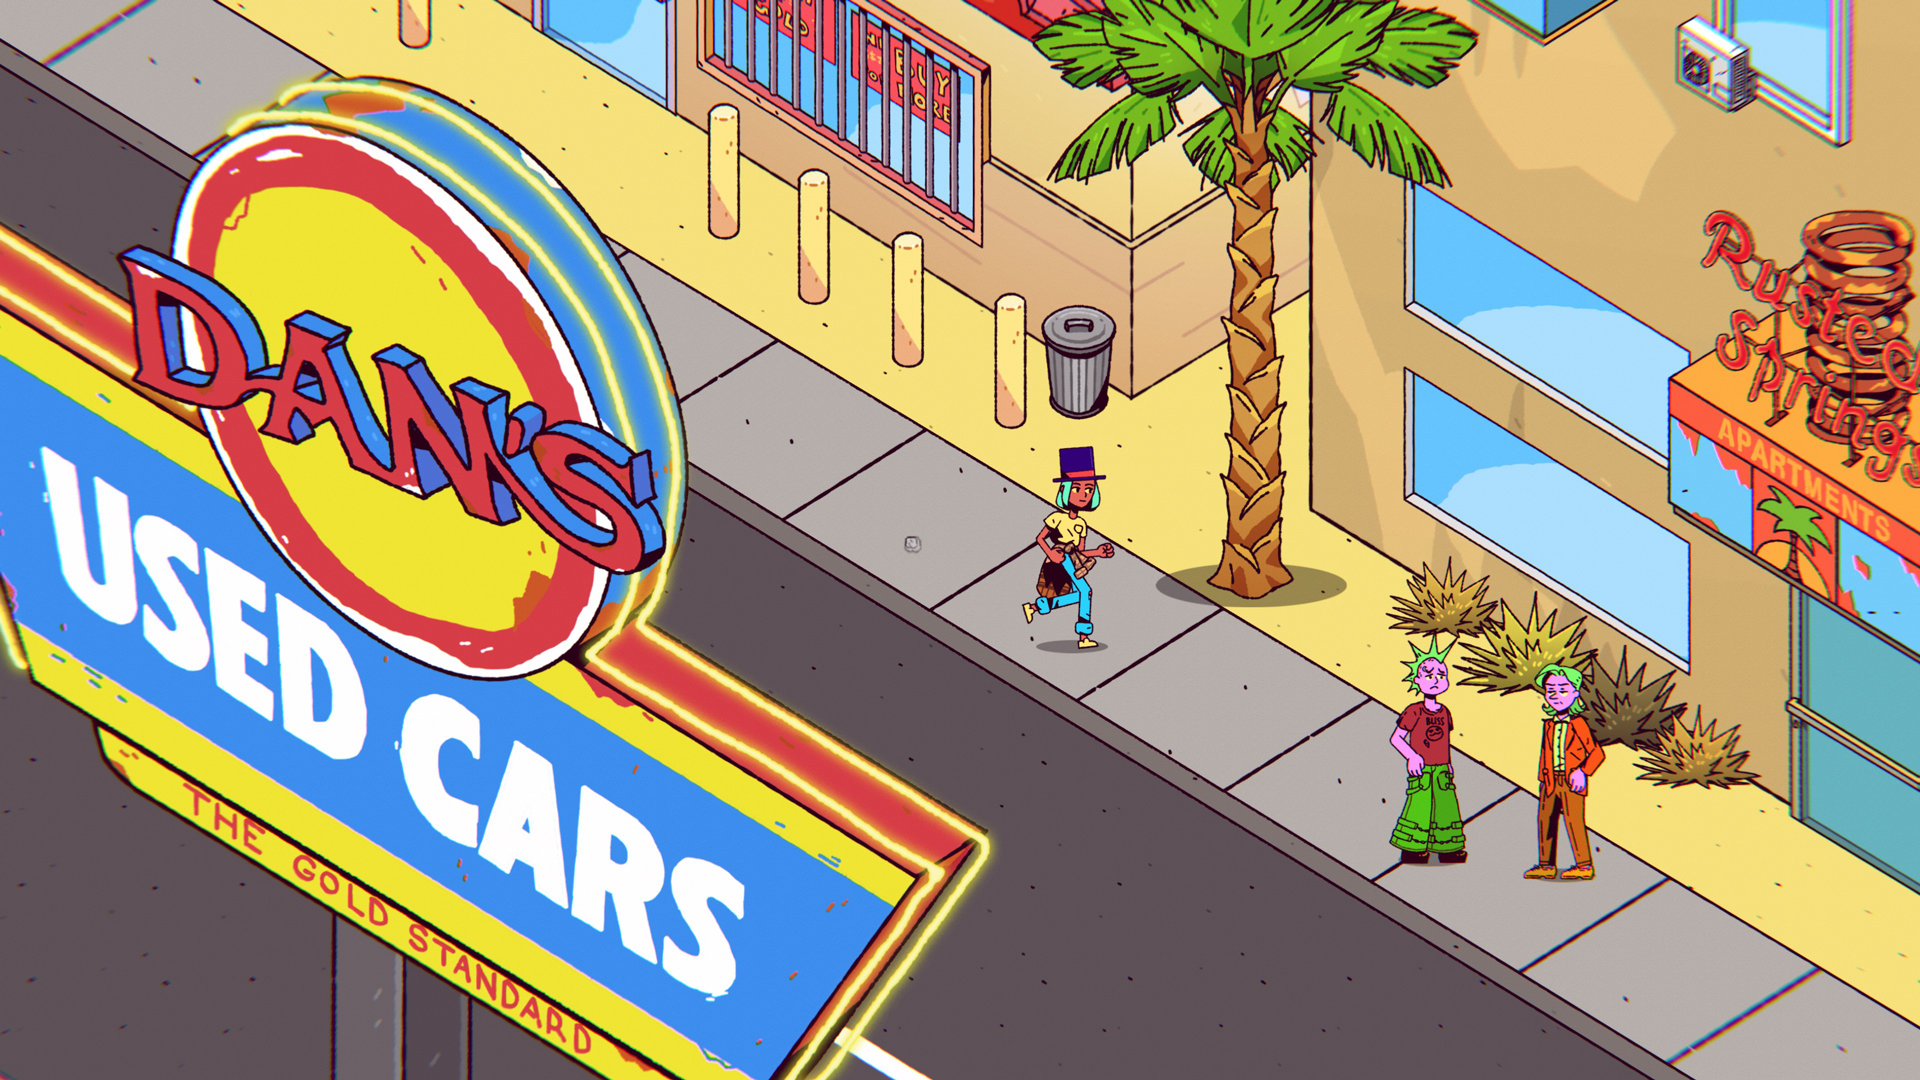 Ali running around a rough part of town wearing a top hat. A sign reading 'Dan's Used Cars' is in the foreground.